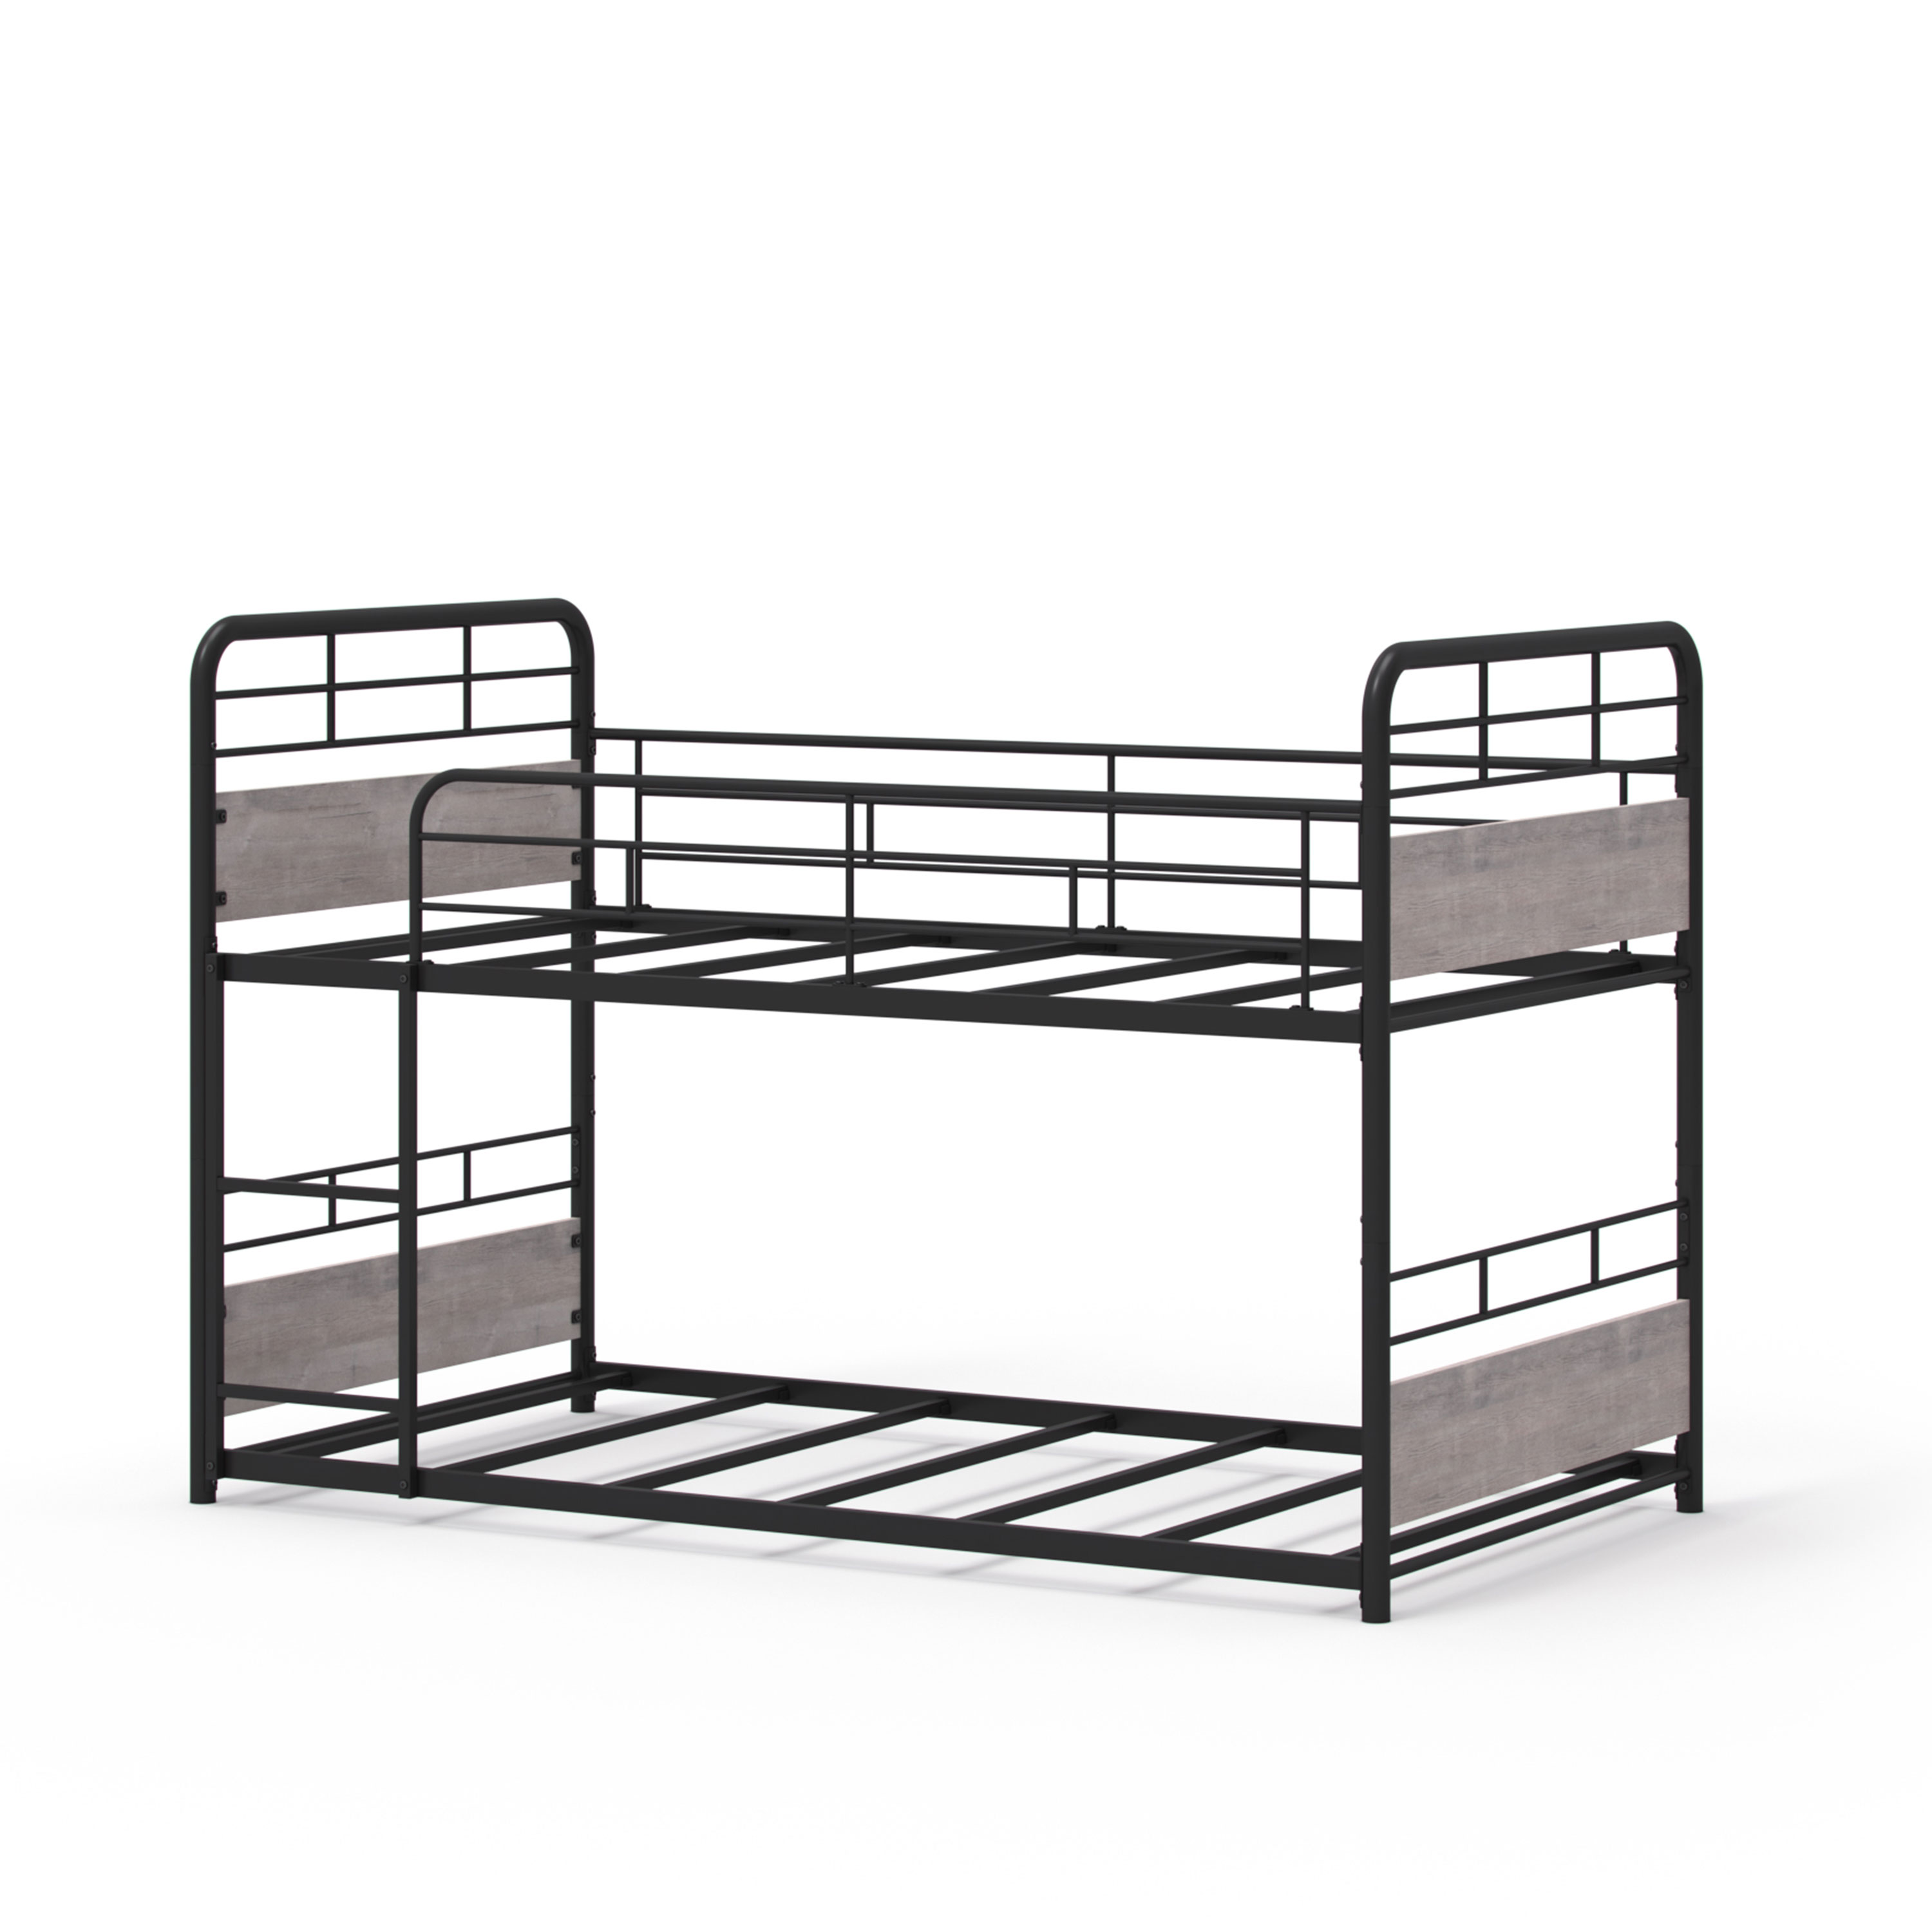 Better Homes & Gardens Anniston Convertible Black Metal Triple Twin Bunk Bed, Gray Wood Accents - image 23 of 26